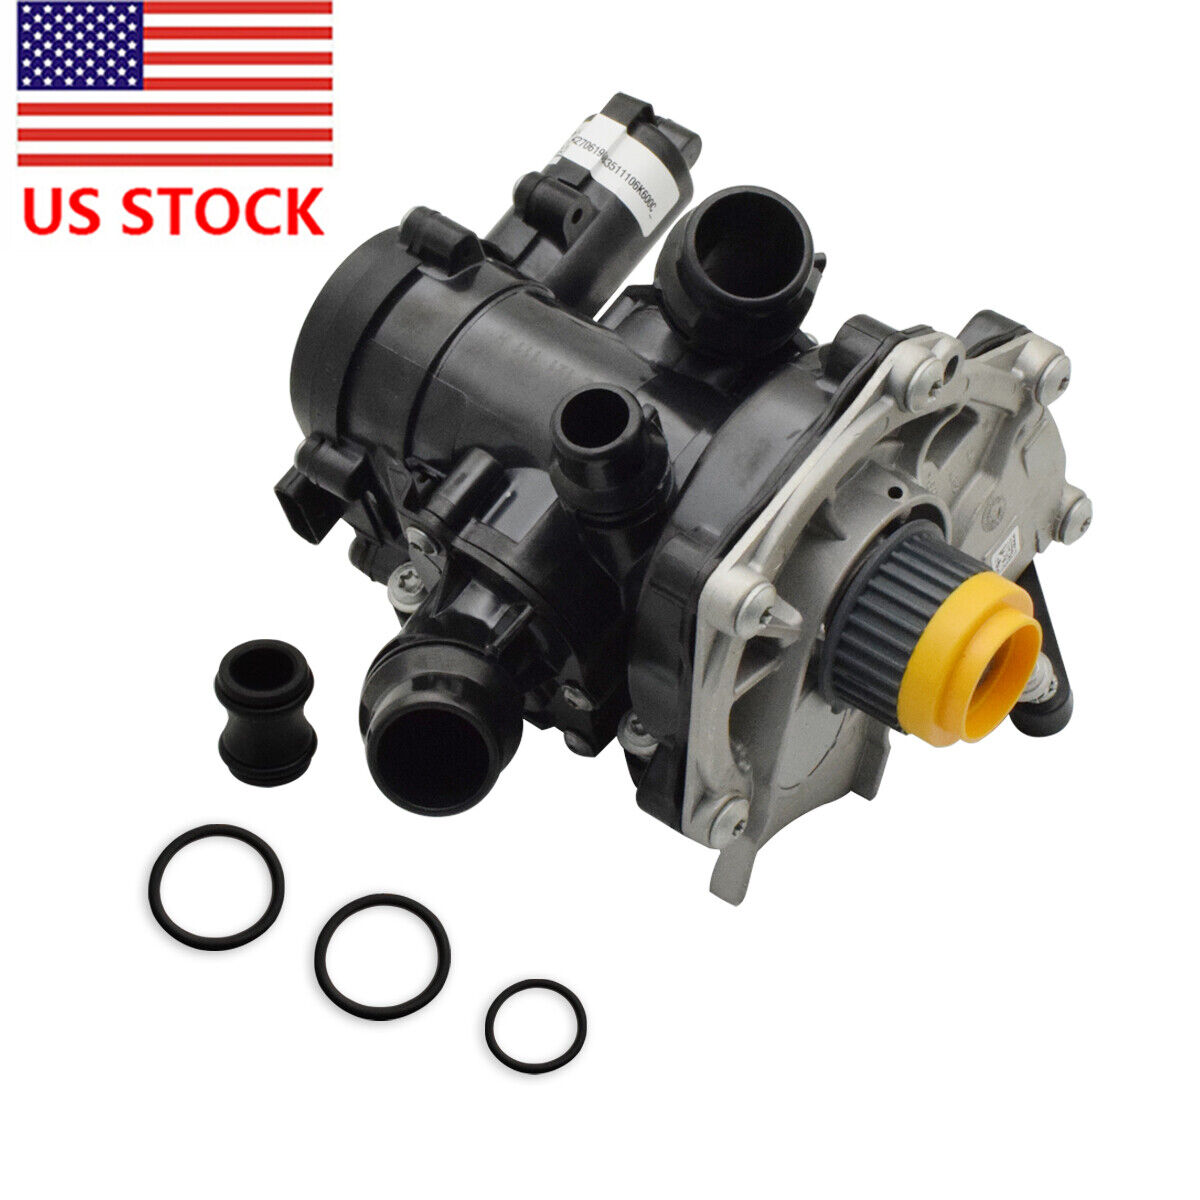 New Water Pump Thermostat Housing Assembly For VW Beetle Golf GTI Passat Tiguan